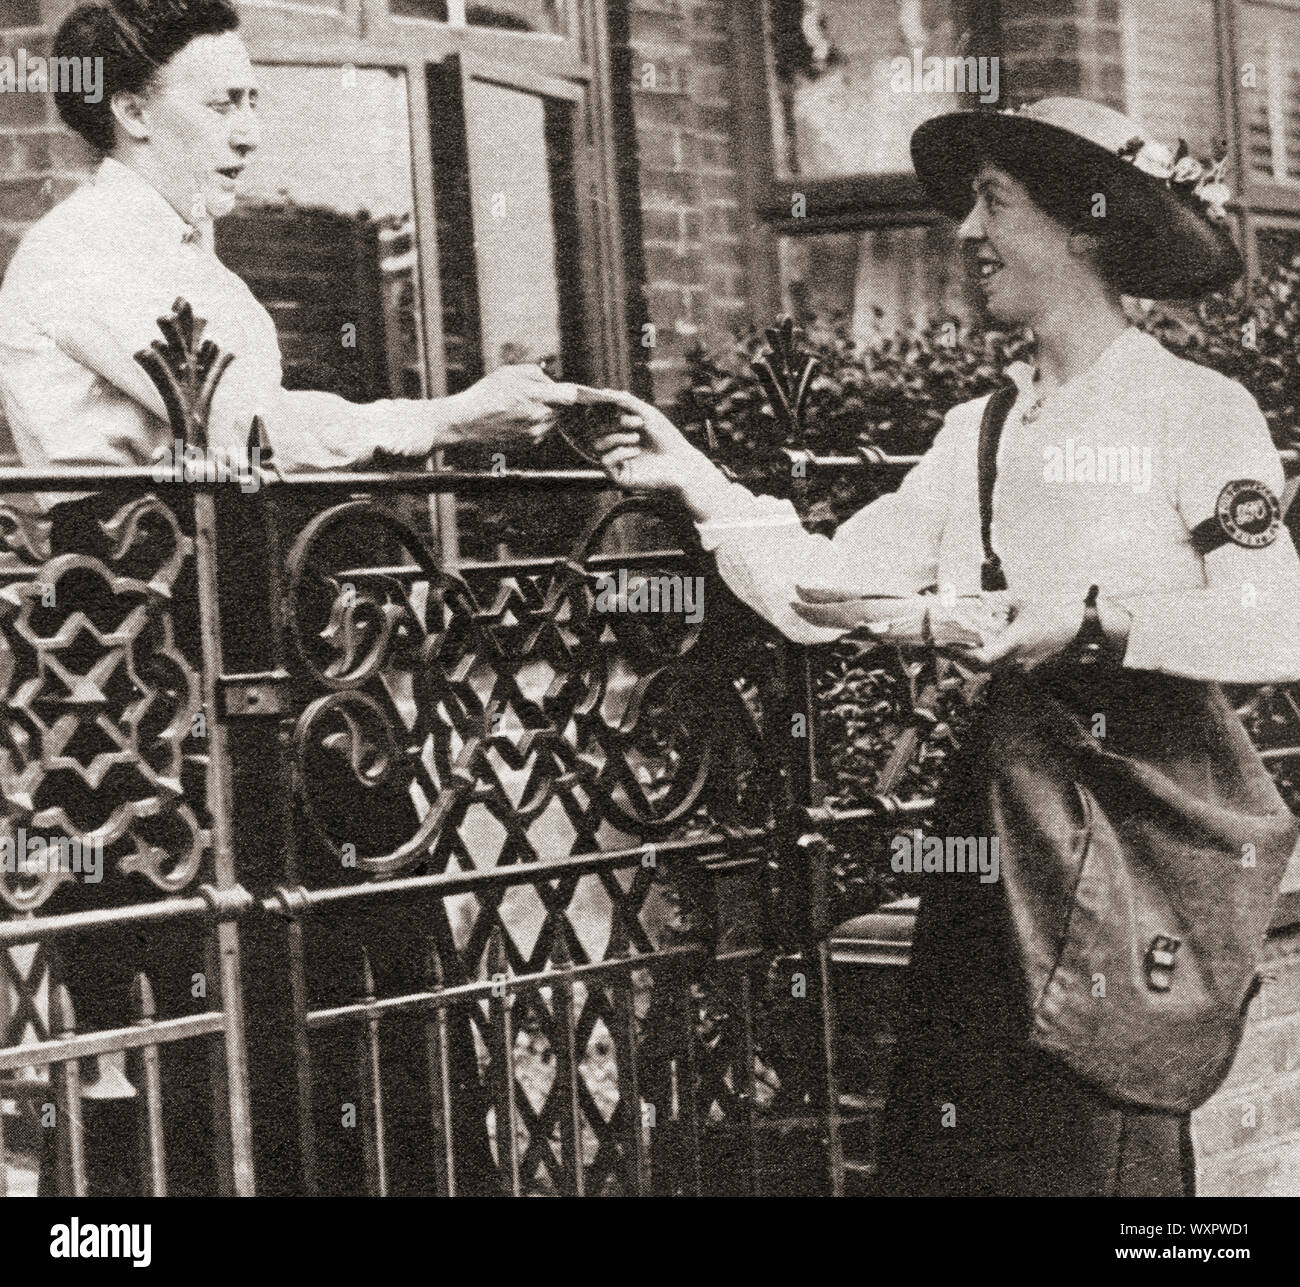 Postwomen delivering letters during World War One.  From The Pageant of the Century, published 1934. Stock Photo